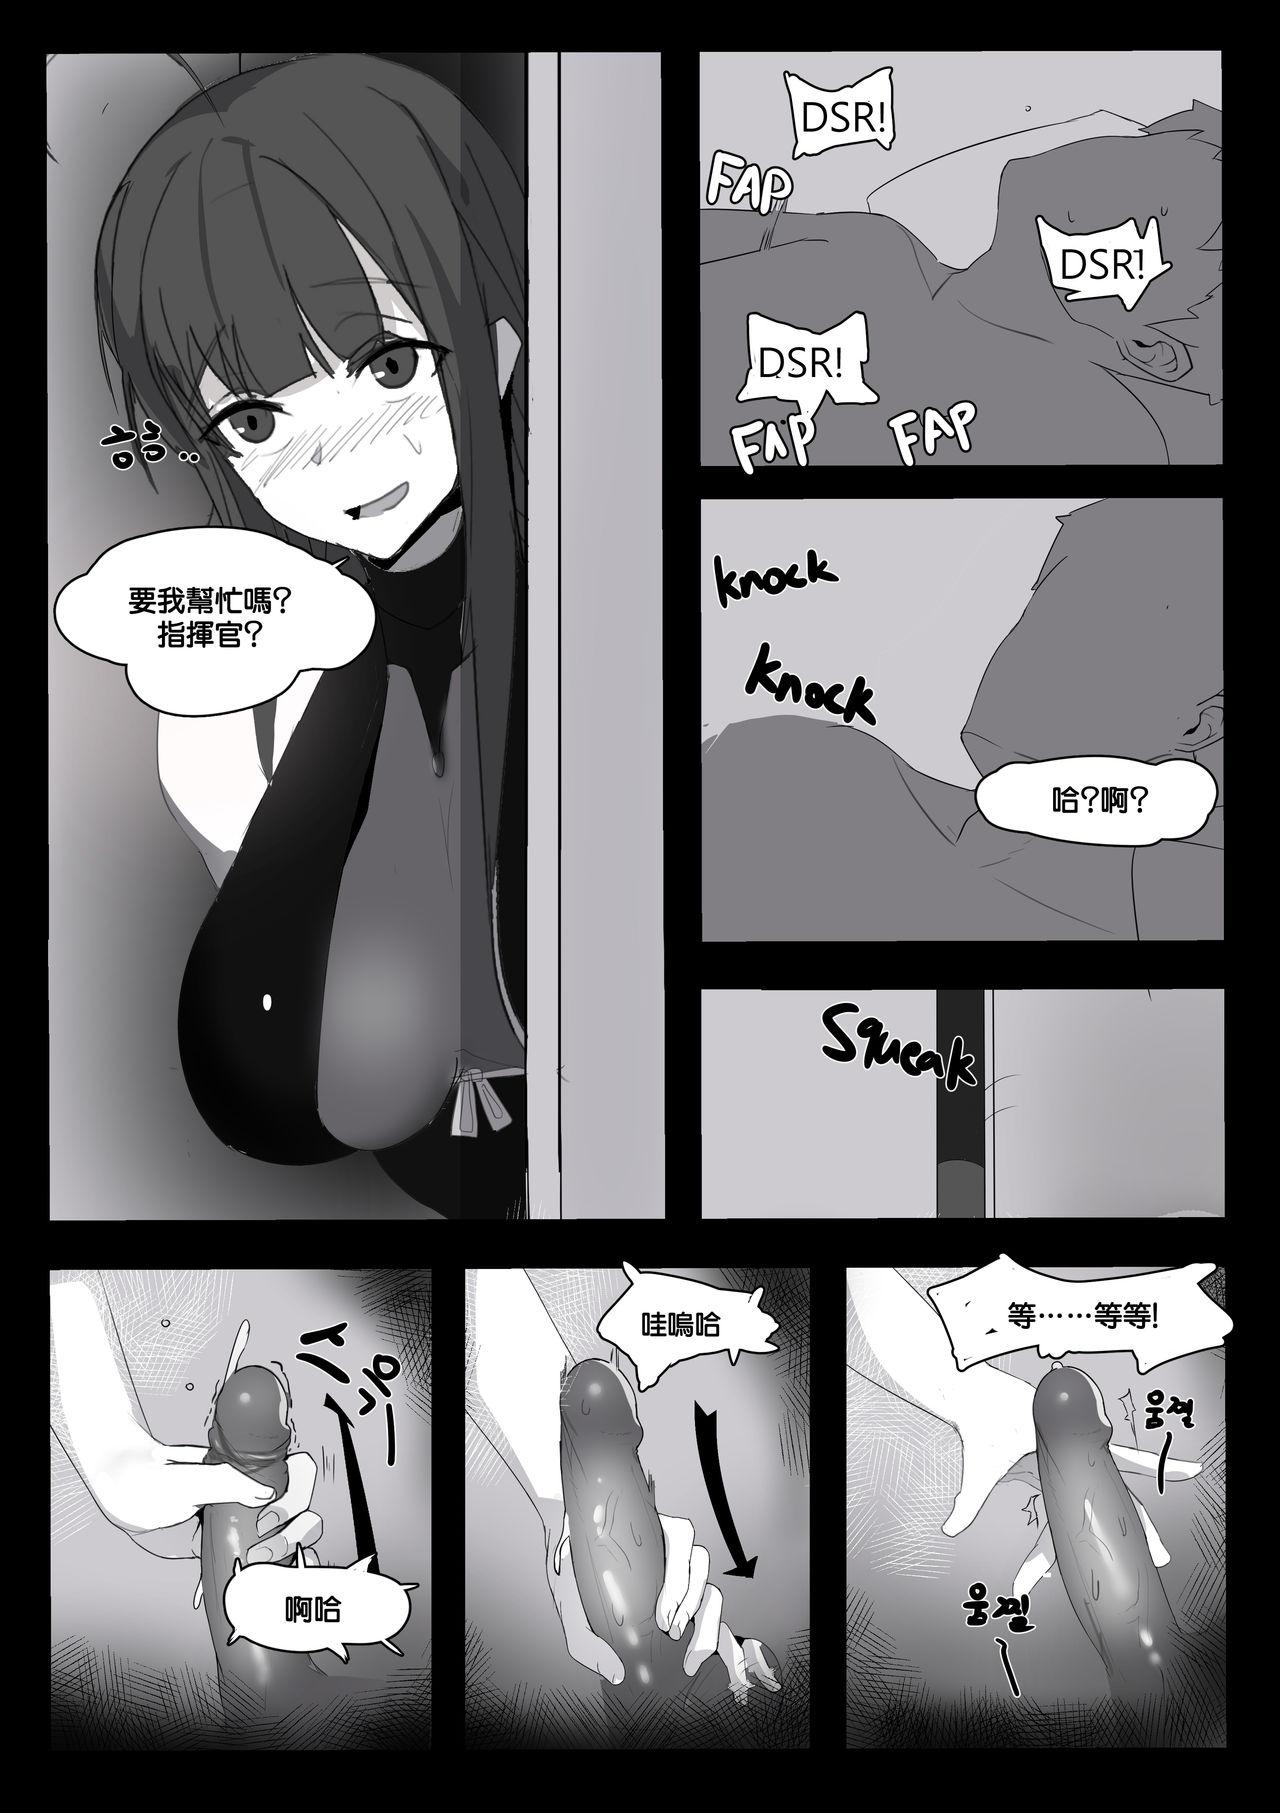 Shorts August 2018 - DSR Manga - Girls frontline Mexican - Page 4